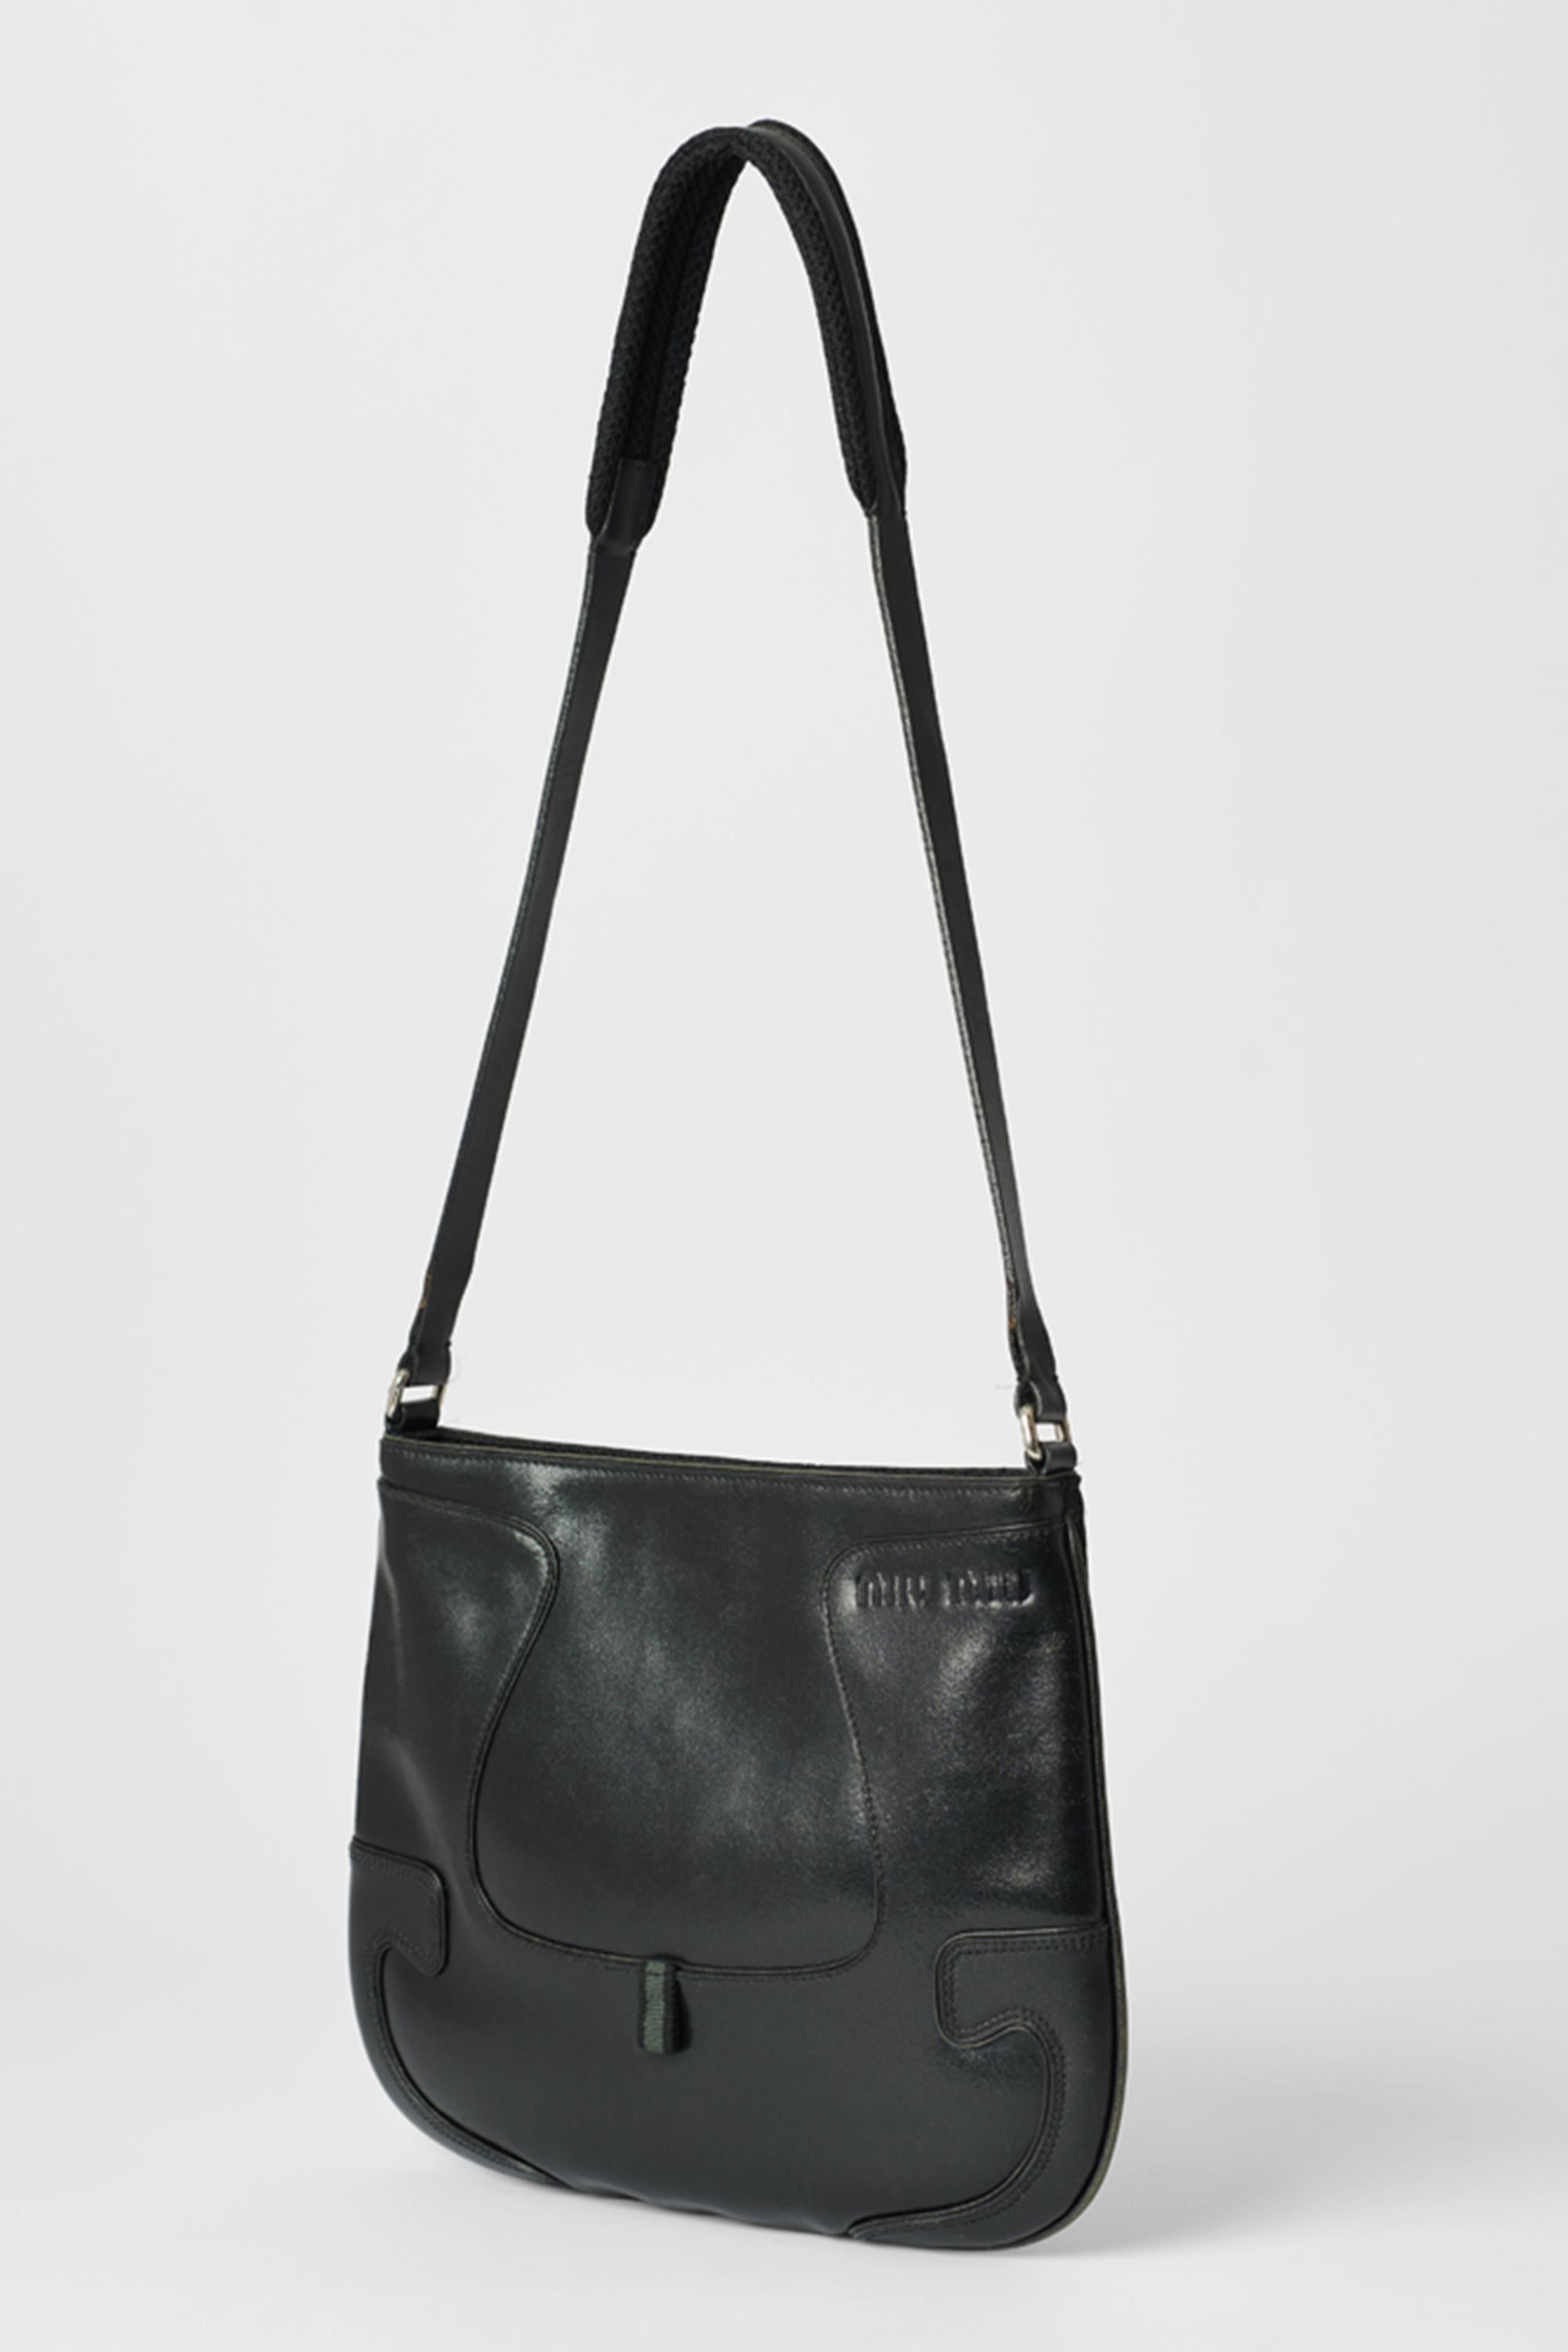 Miu Miu black leather bag with perforated side, to be worn either way. Features 